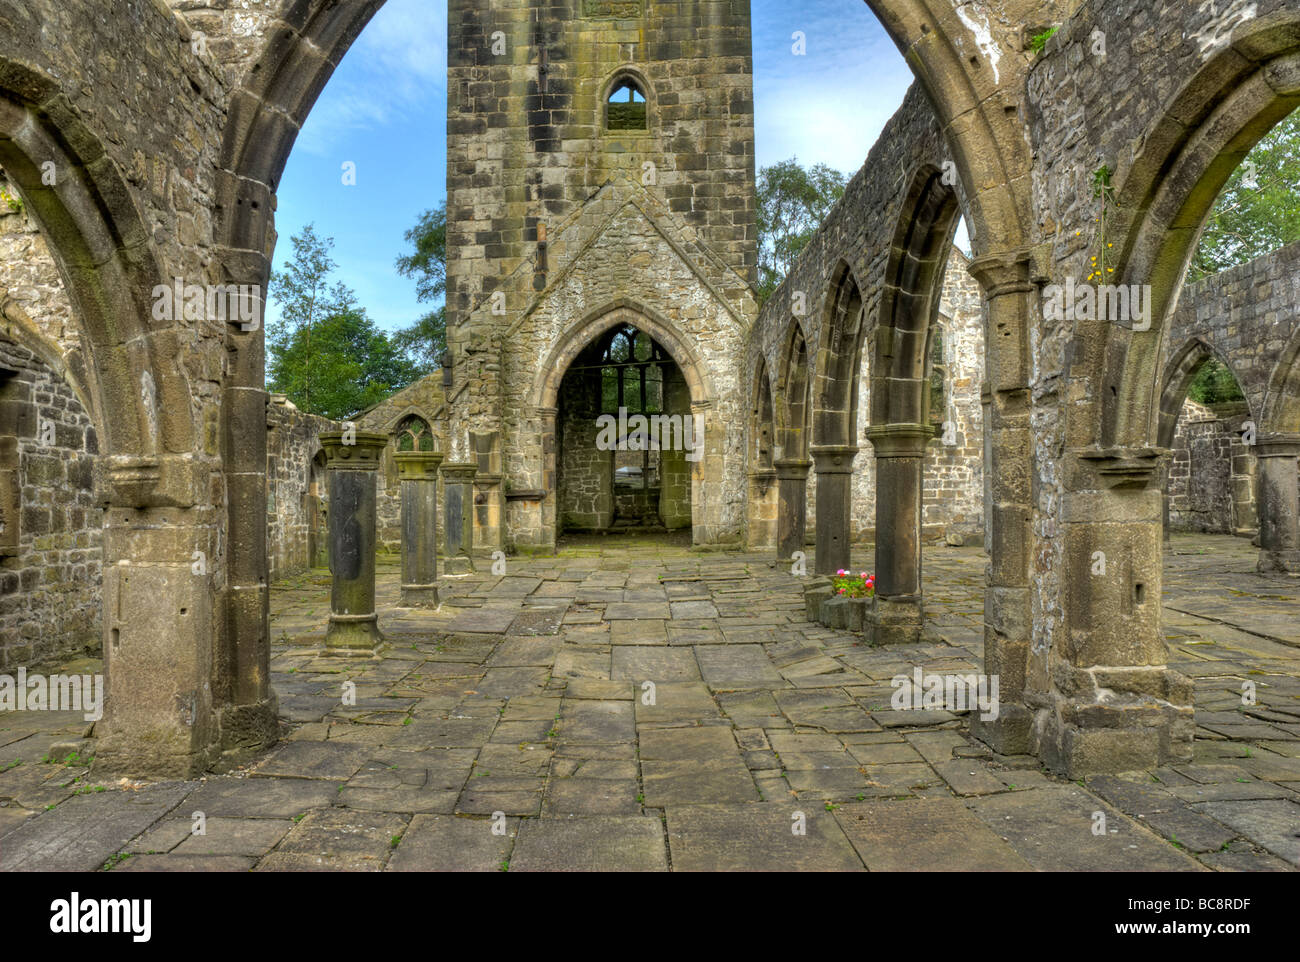 Interior Of The Old Church In The Village Of Heptonstall, Calderdale, West Yorkshire, England Uk Stock Photo - Alamy